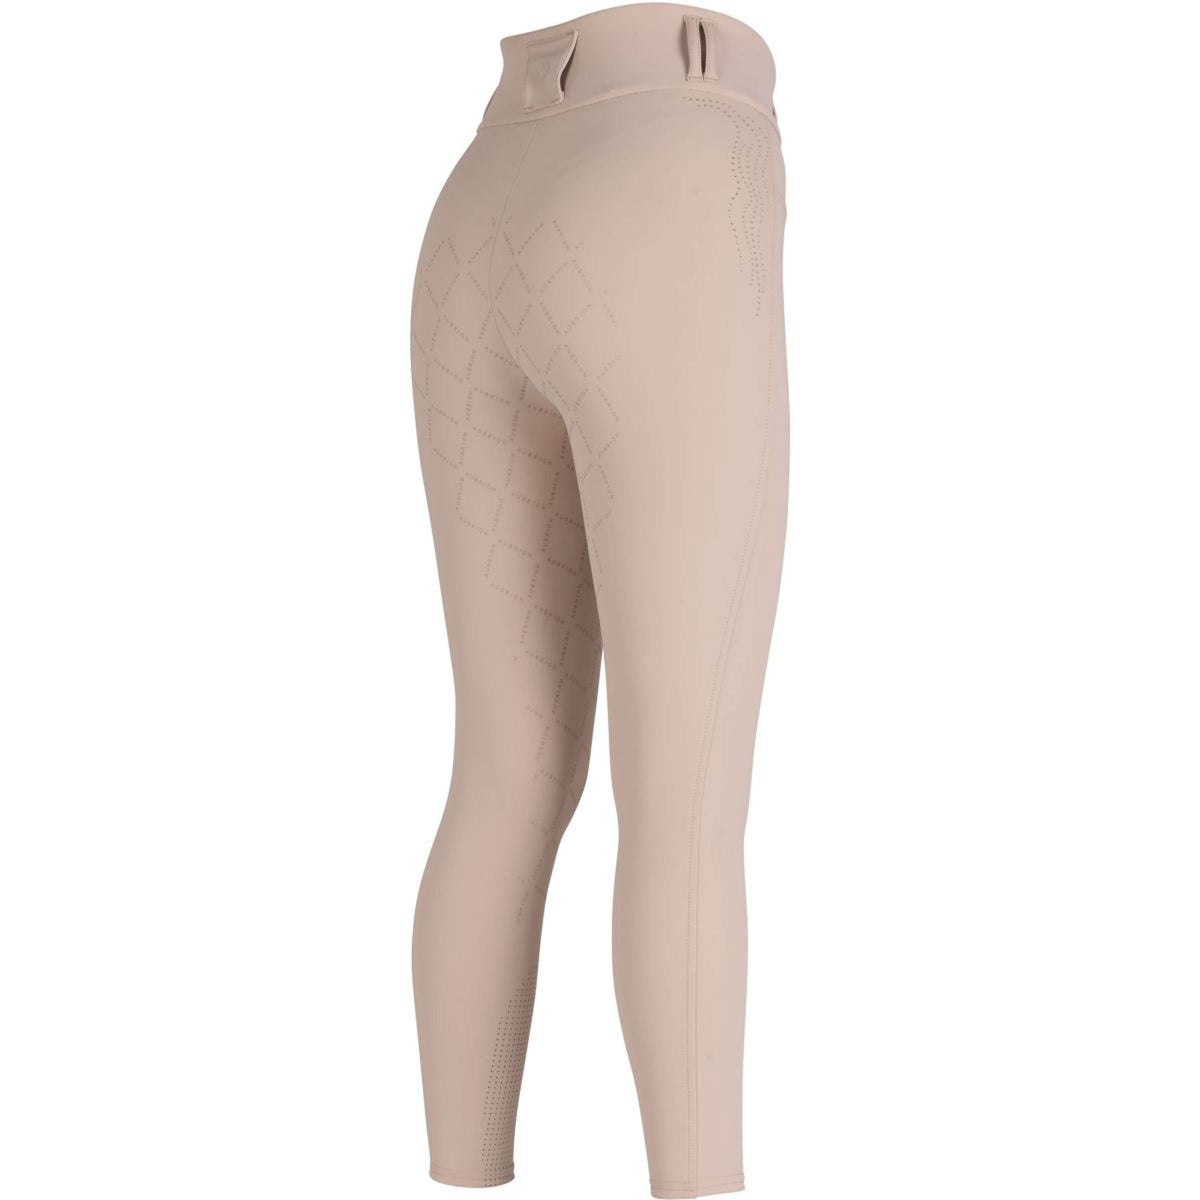 Aubrion by Shires Reithose Optima Luxe Beige